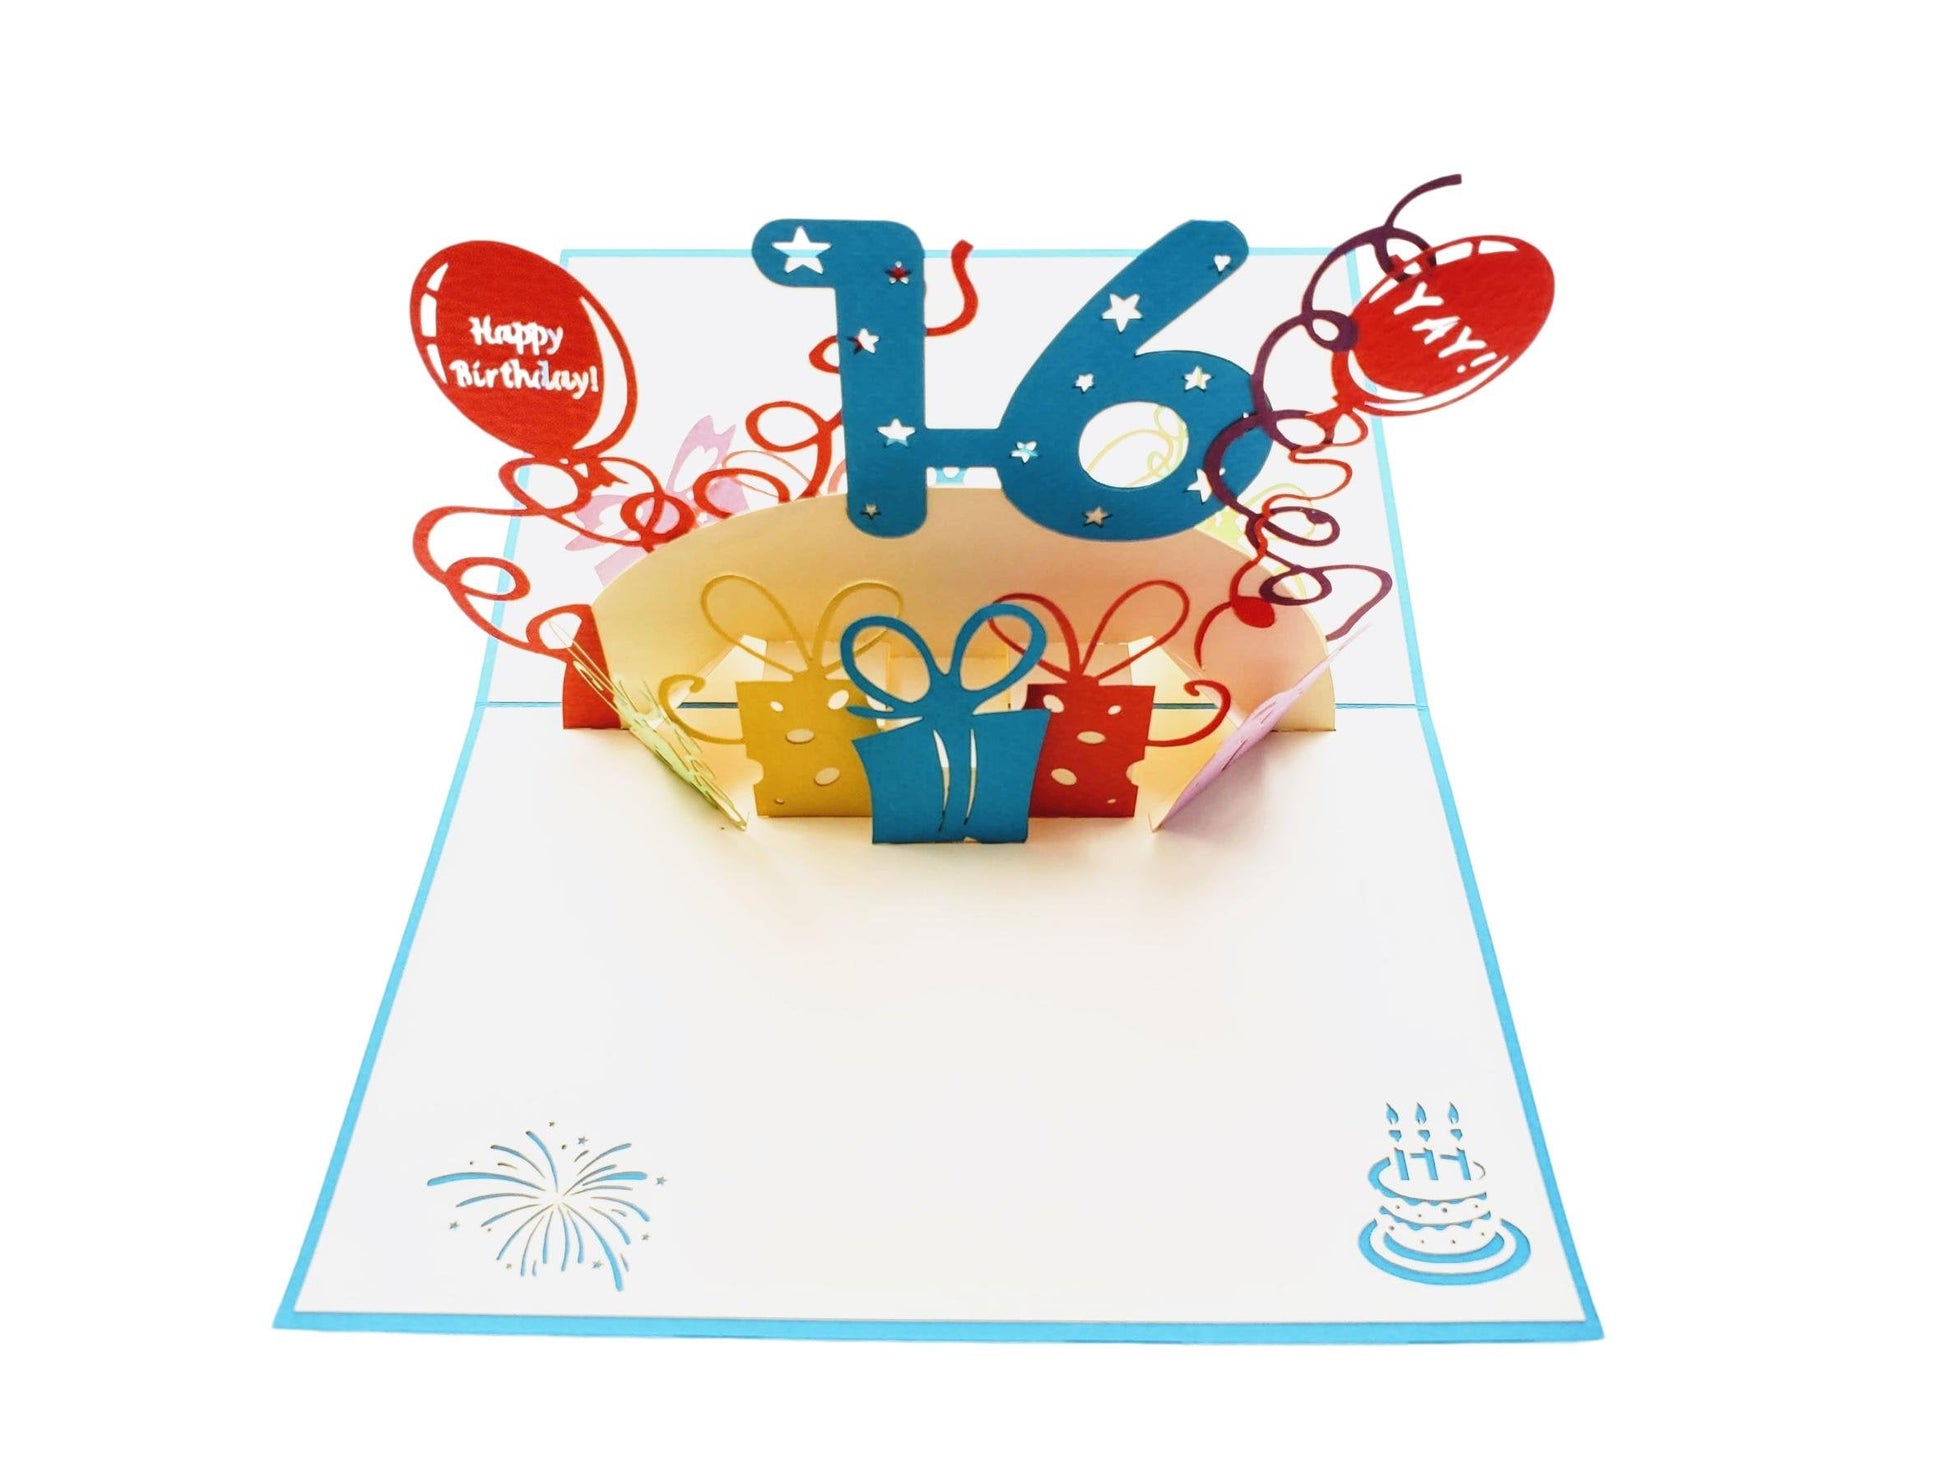 Happy 16th Birthday with Presents 3D Pop Up Greeting Card - best deal - Birthday - iGifts And Cards